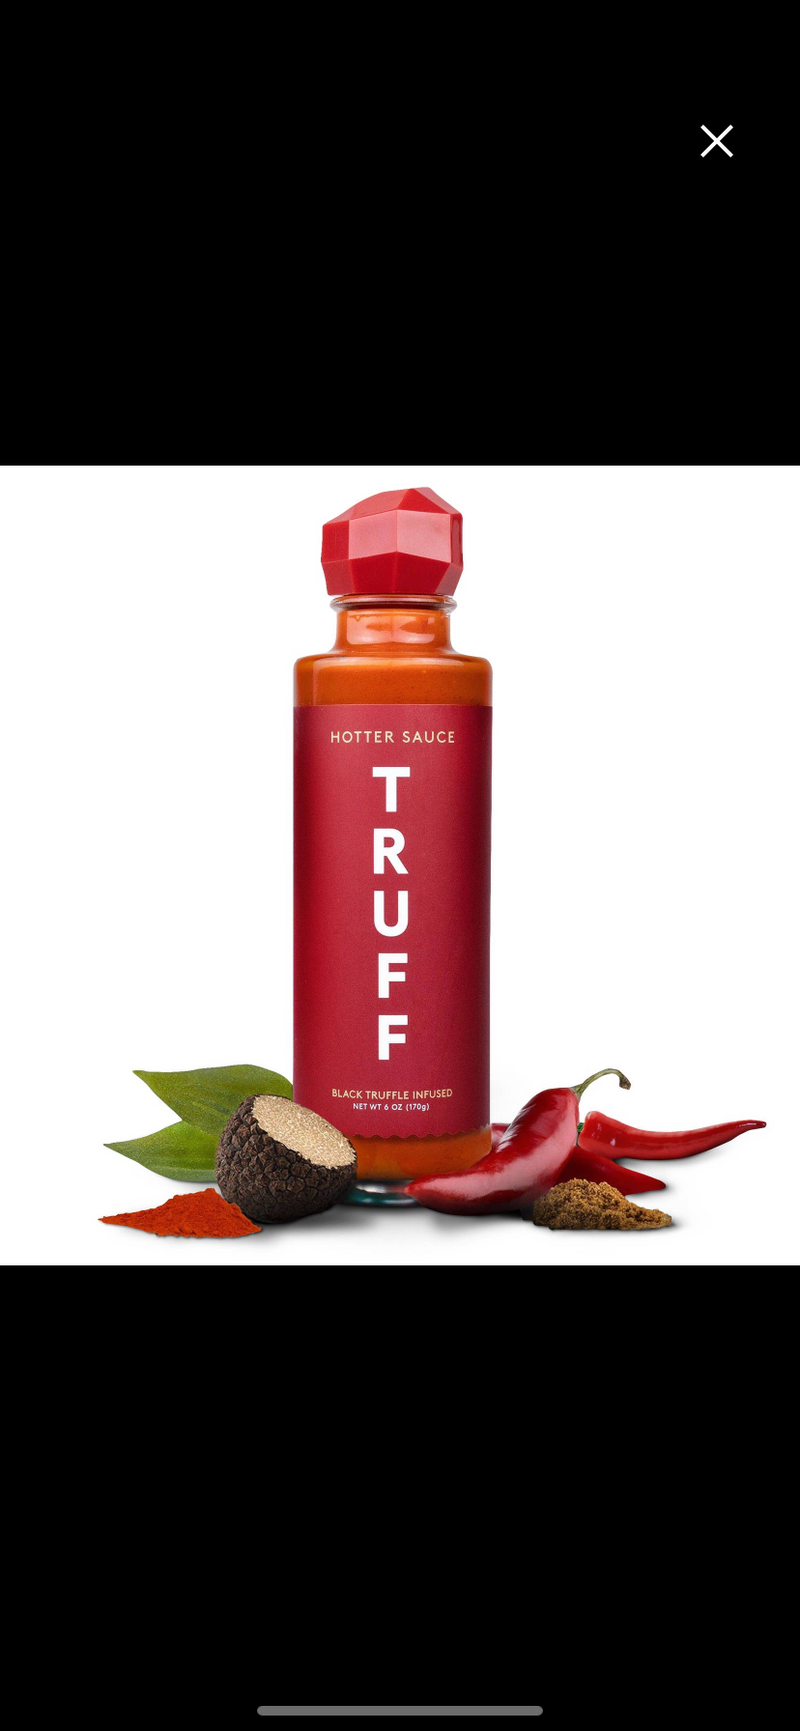 Hot Sauce from Truff